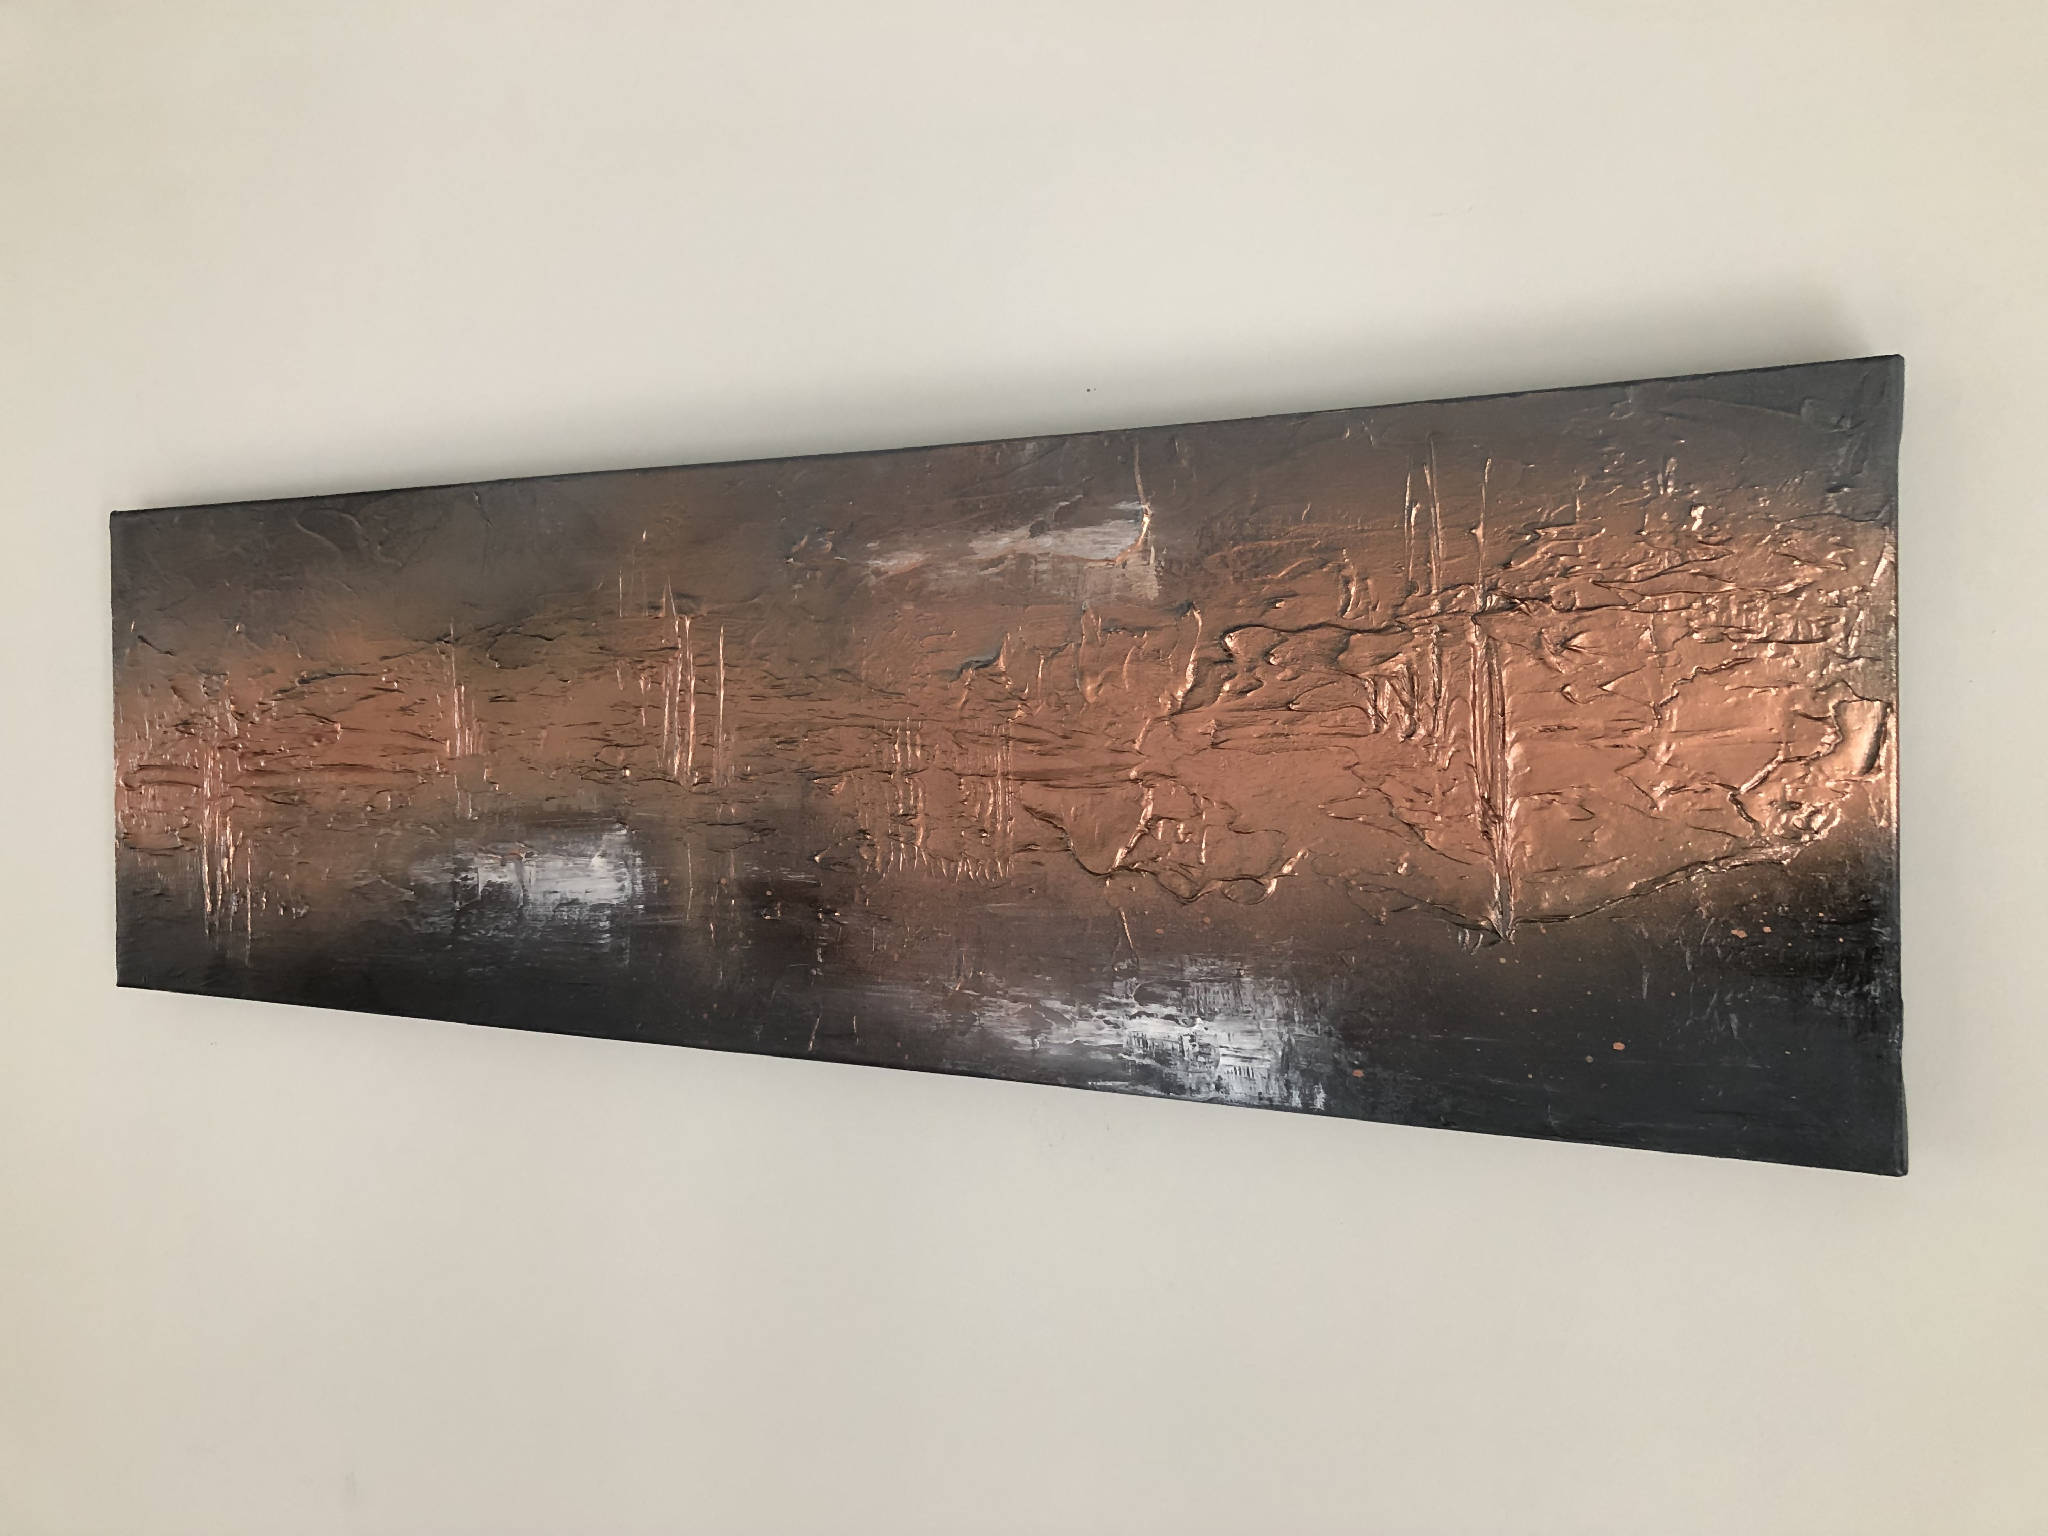 CRUCIBLE - Original industrial style canvas In greys and copper (100x30x4cm)